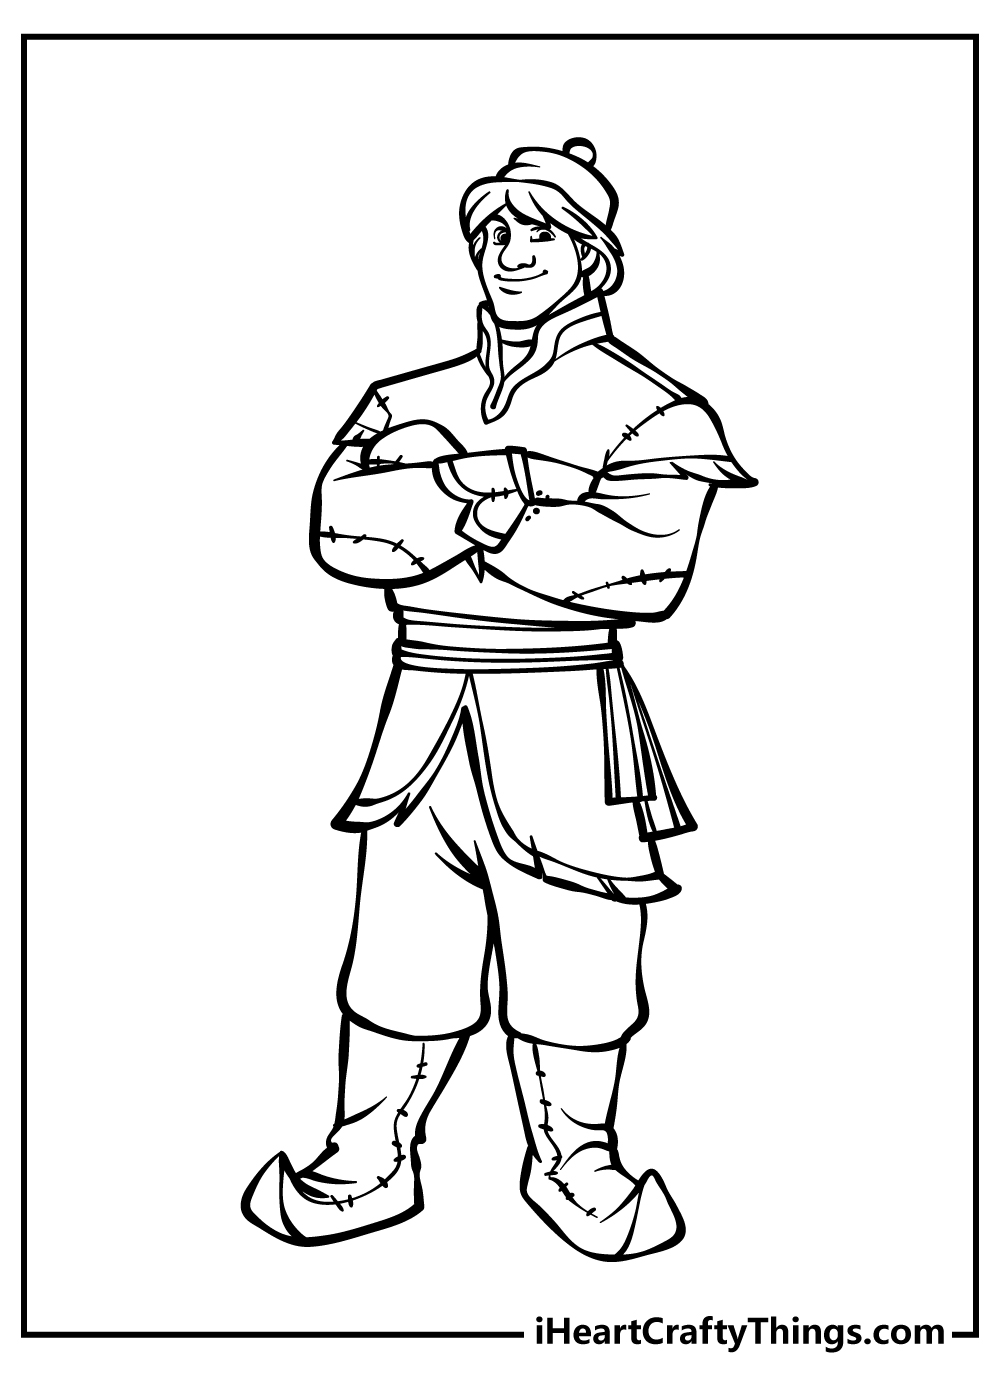 Frozen Coloring Pages free pdf download